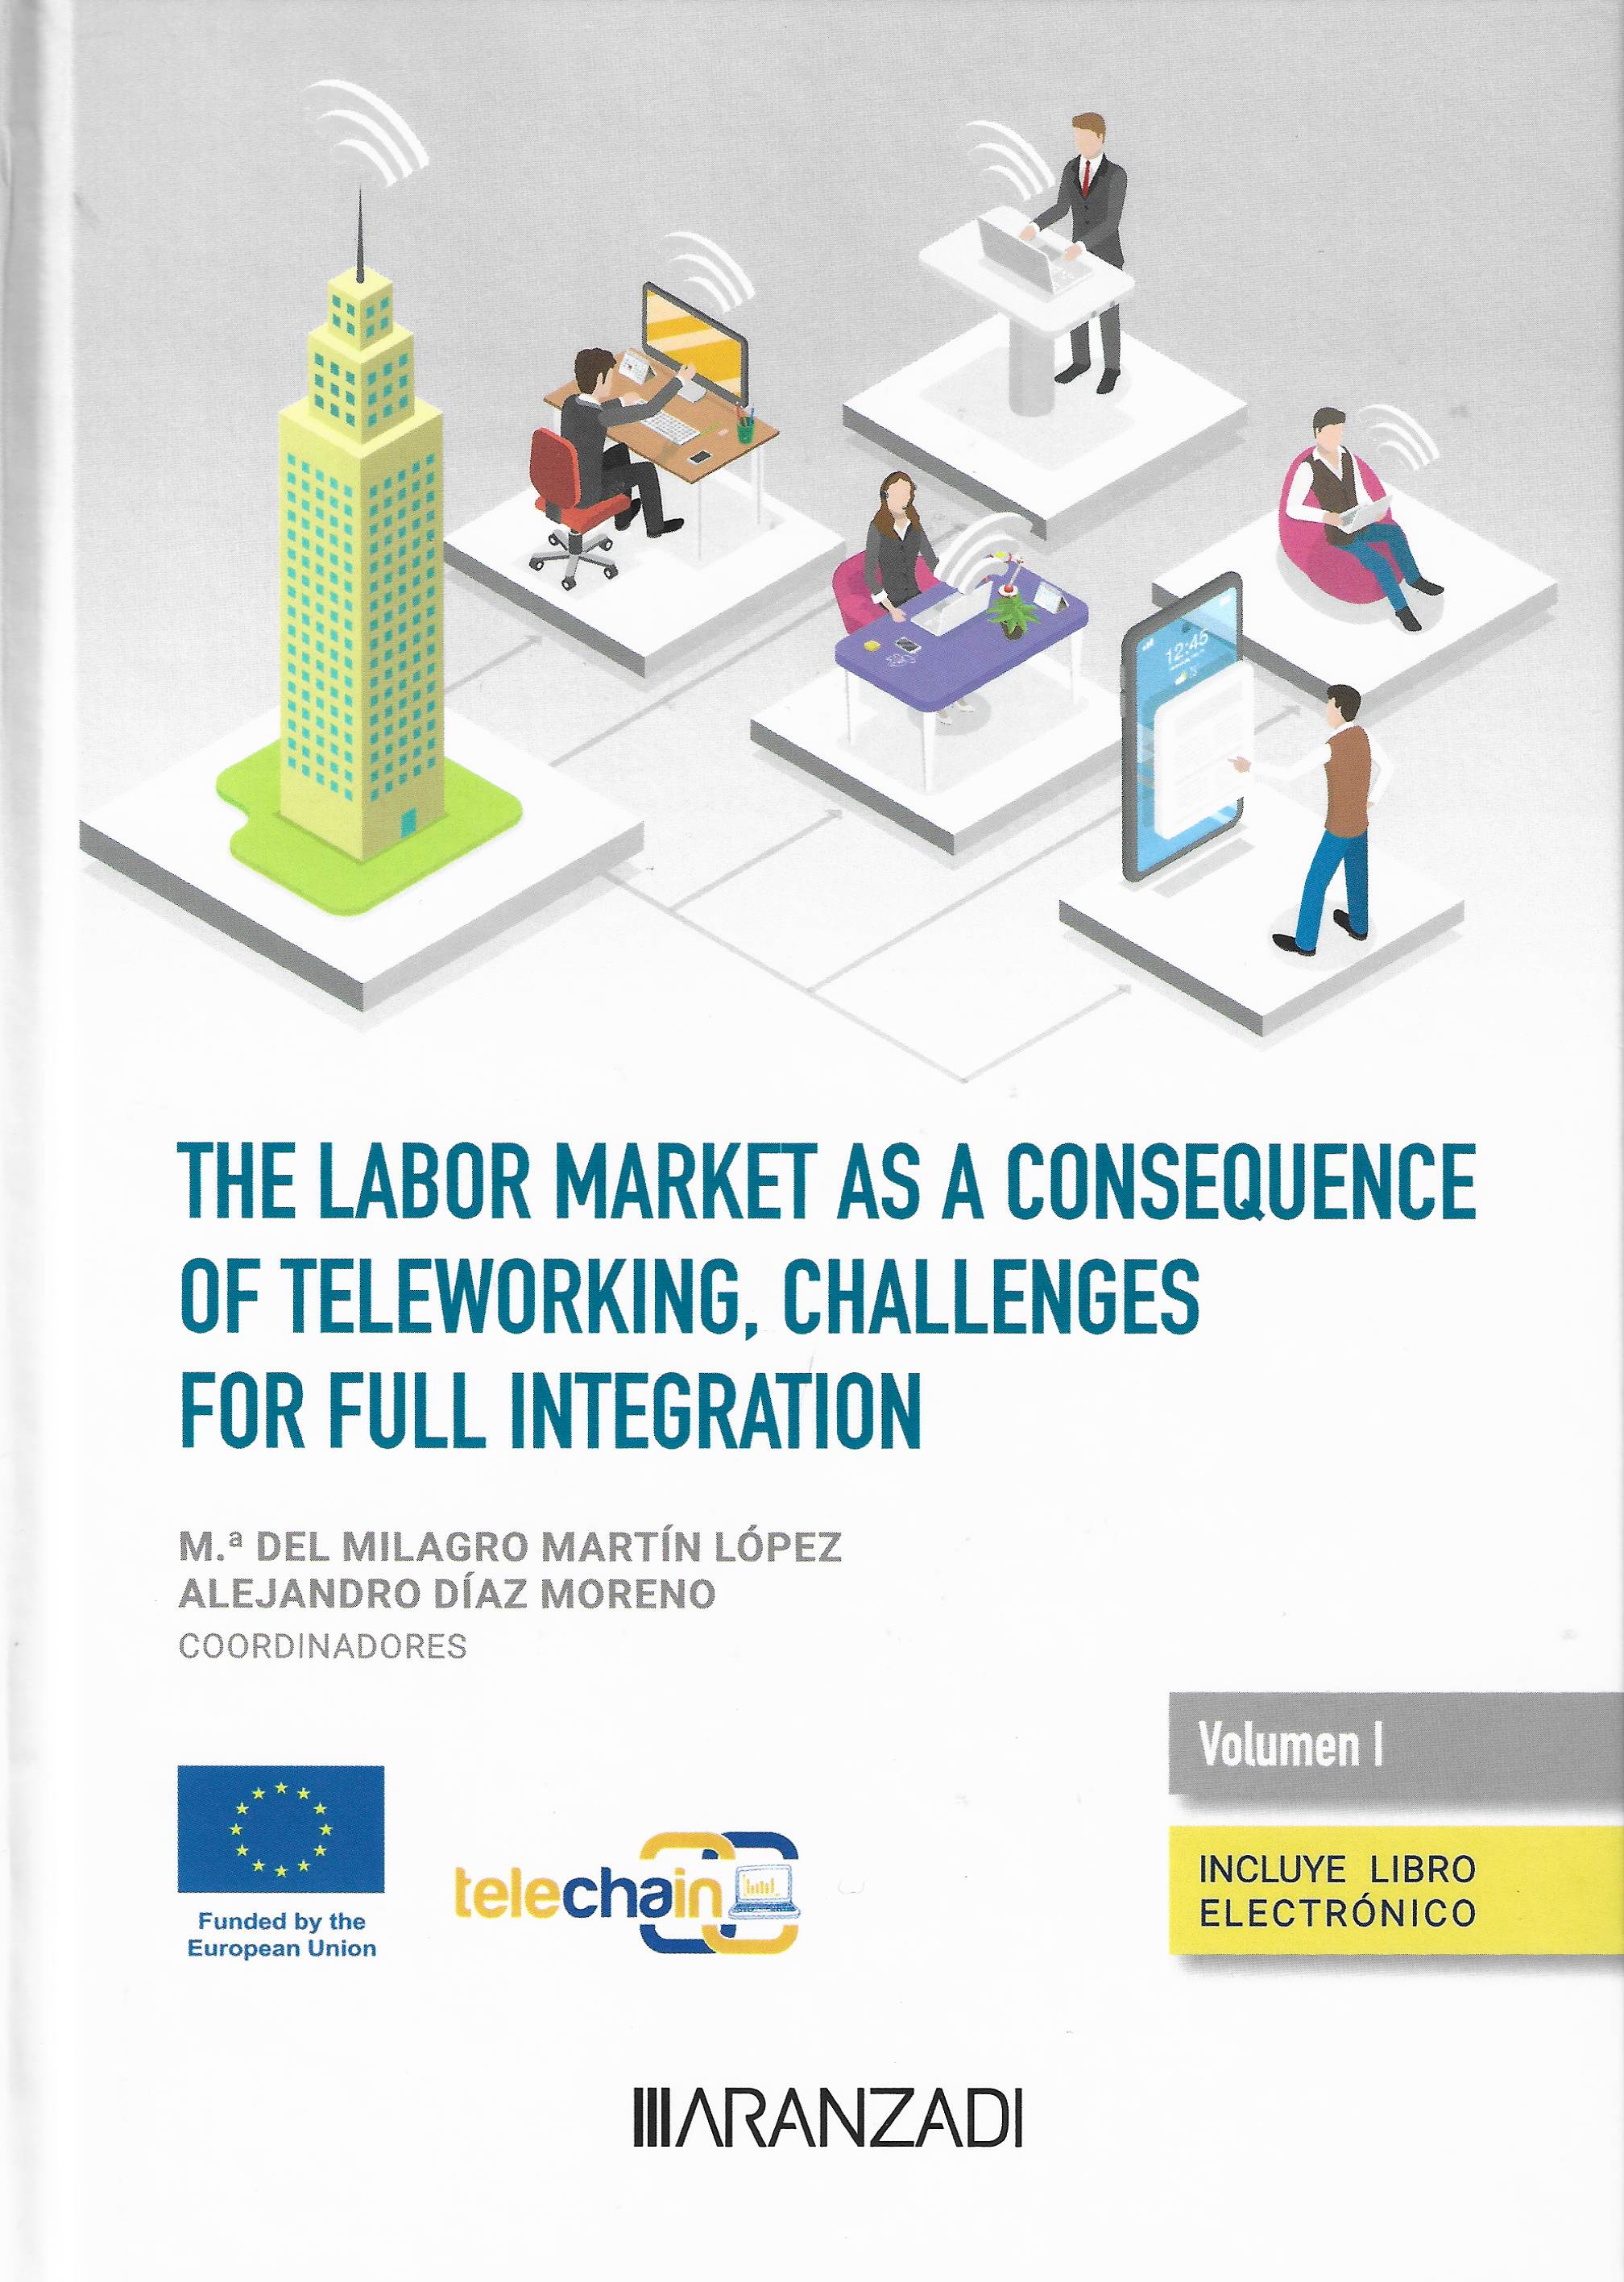 Imagen de portada del libro The labor Market as a Consequence of Teleworking, Challenges for full Integration